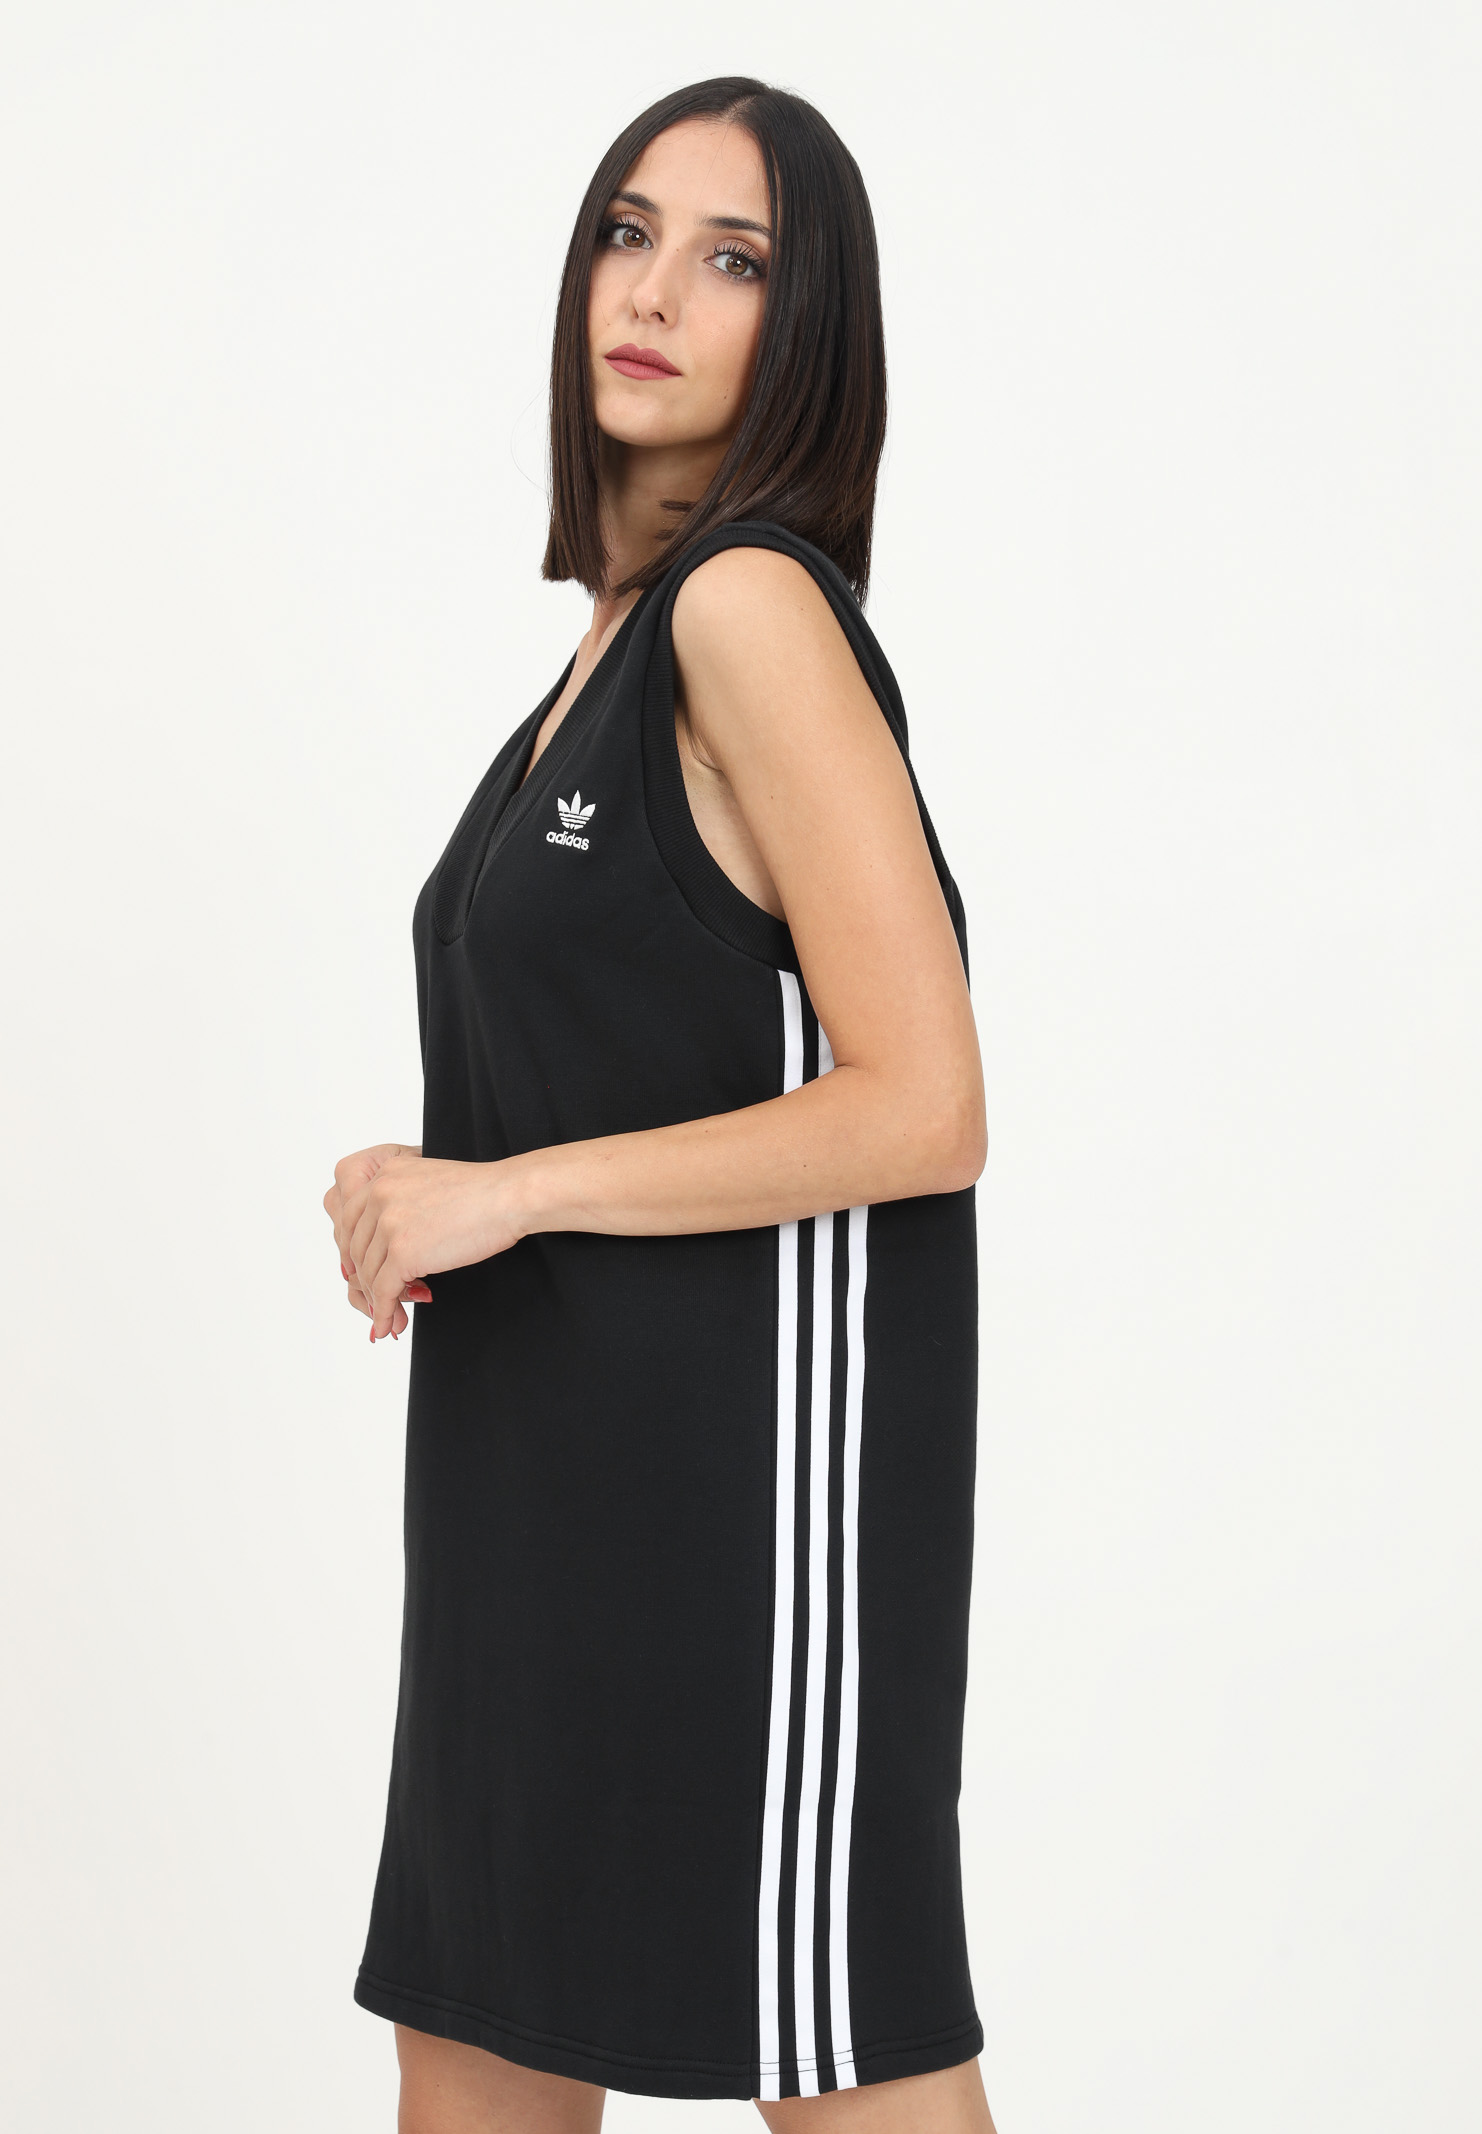 Black short dress for women with logo embroidery and 3 side stripes ADIDAS | HM2134.